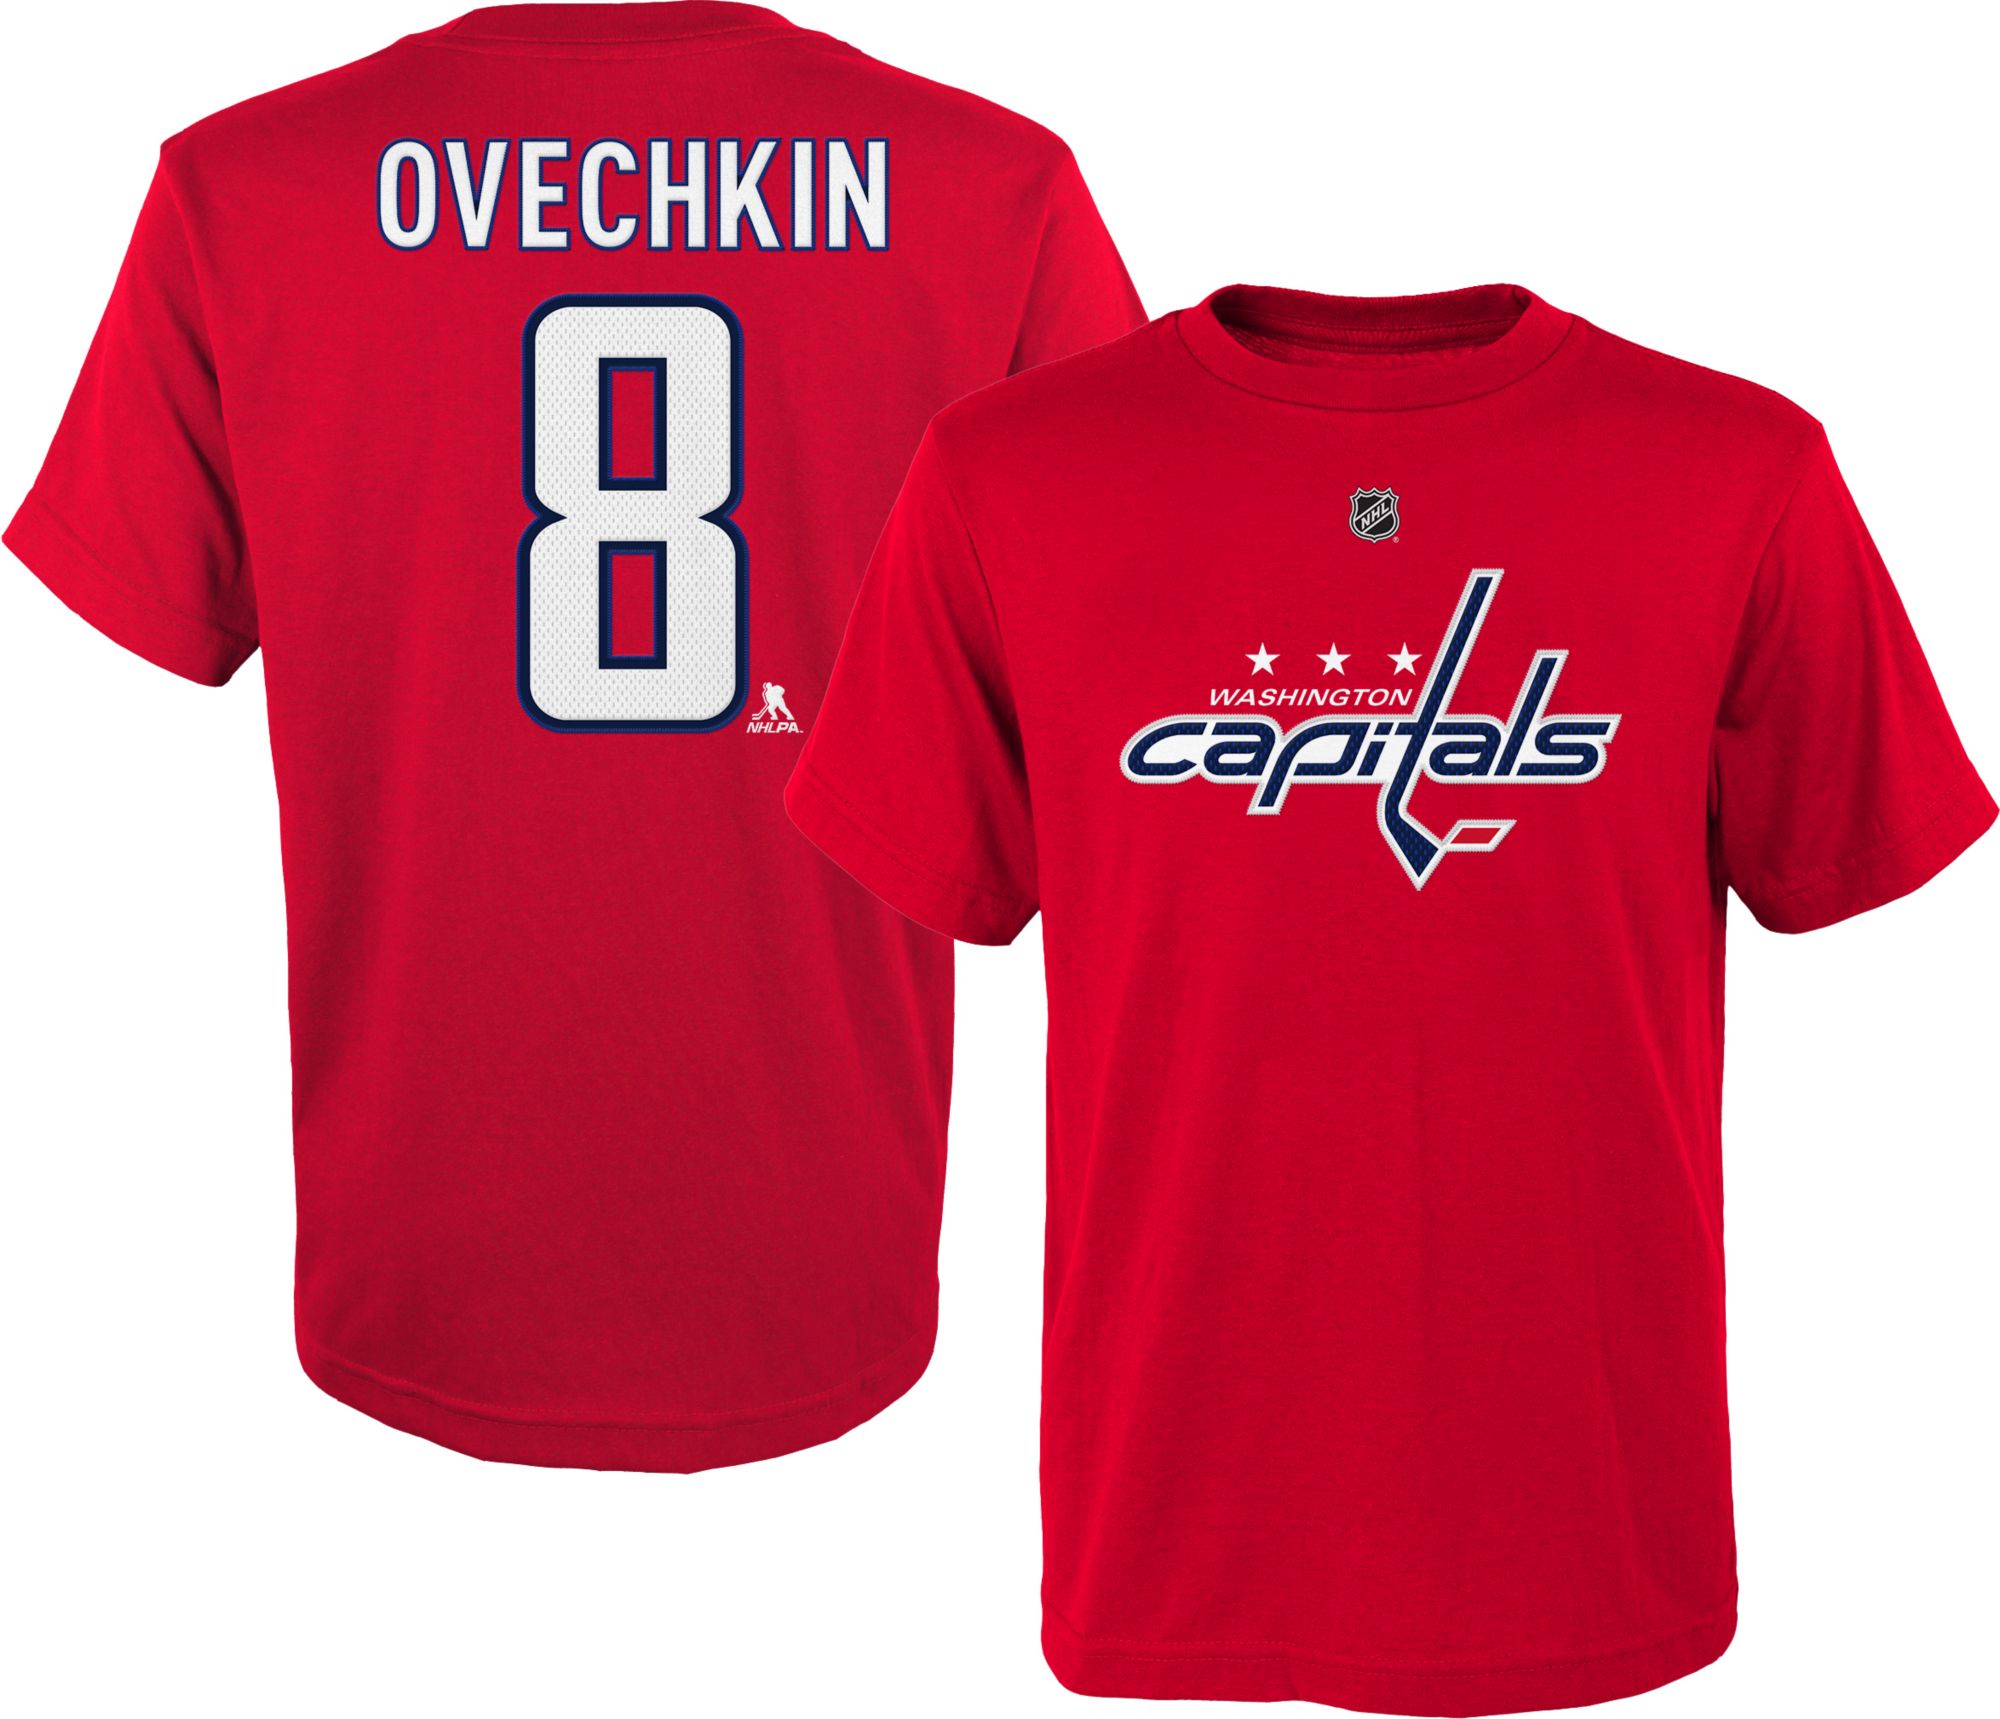 ovechkin youth jersey